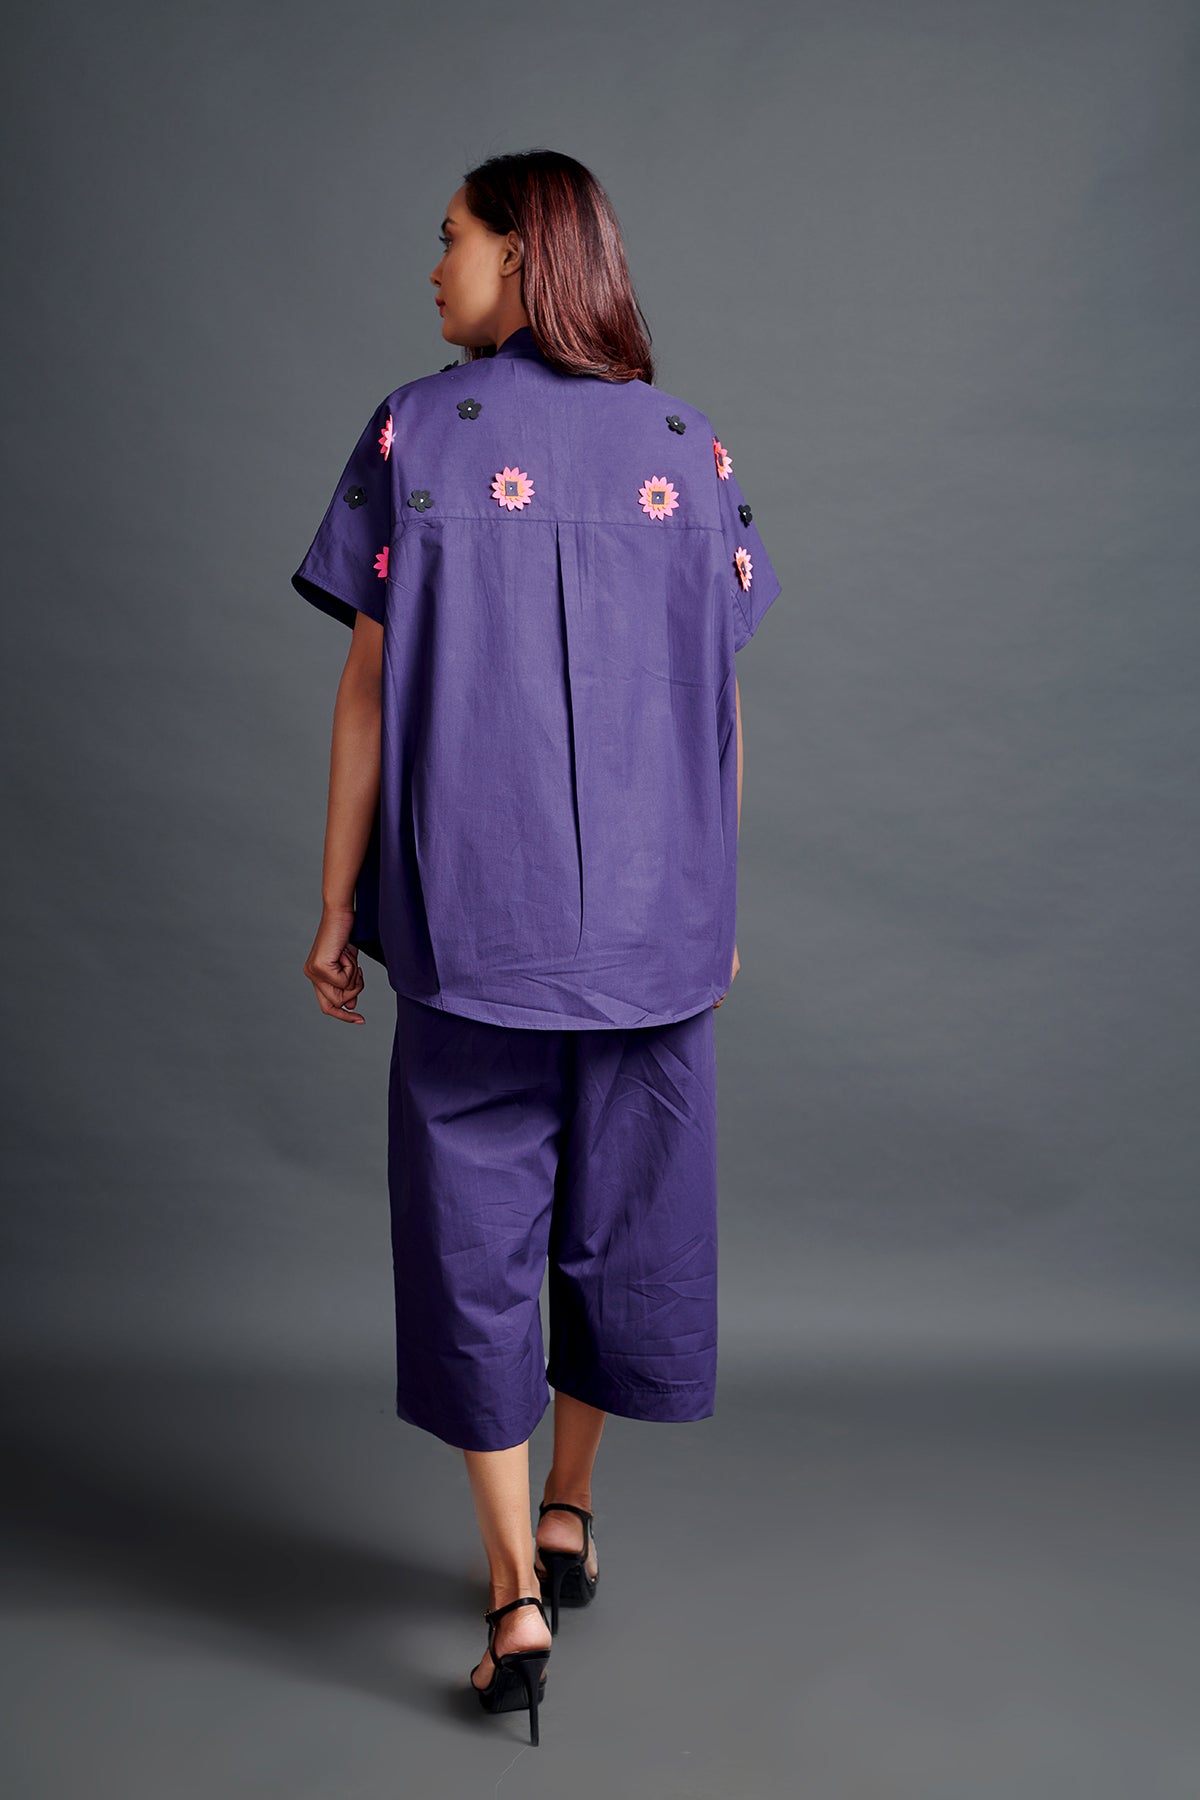 Image of PURPLE OVERSIZED SHIRT IN COTTON BASE WITH CUTWORK EMBROIDERY. IT IS PAIRED WITH MATCHING PANTS. From savoirfashions.com